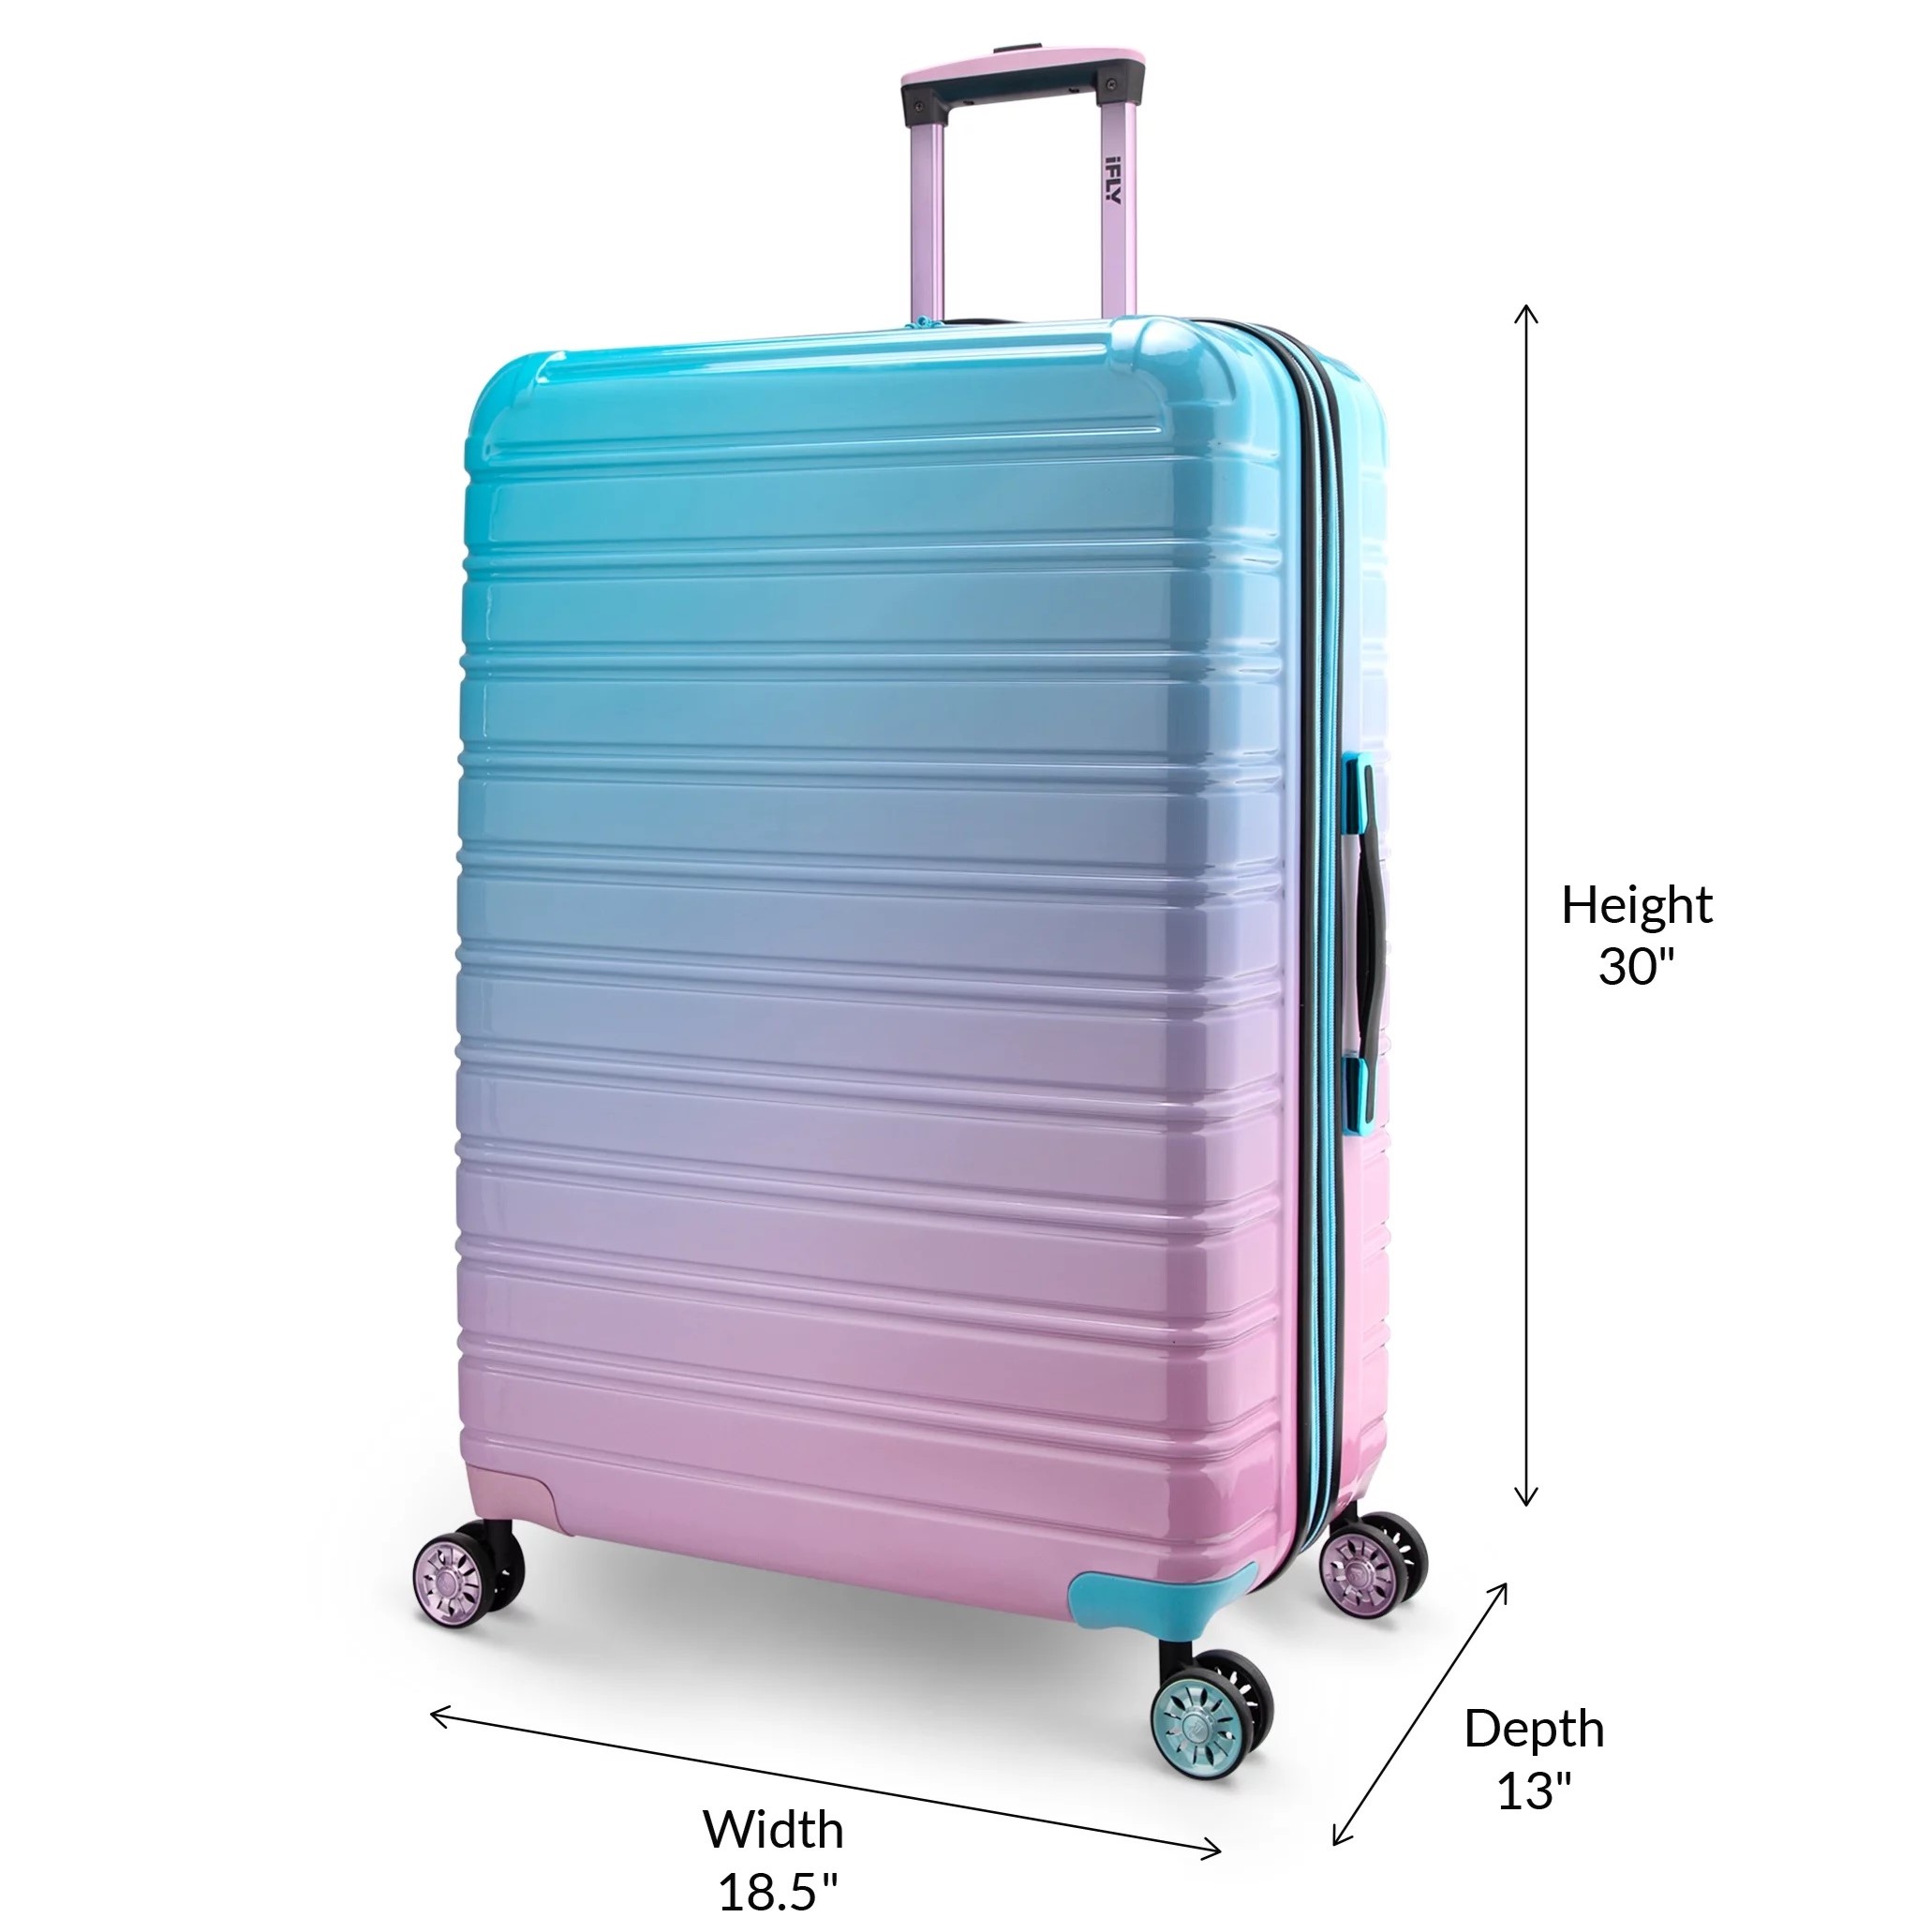 VALI DU LỊCH IFLY FIBERTECH OMBRE HARDSIDE LUGGAGE IN COTTON CANDY 3